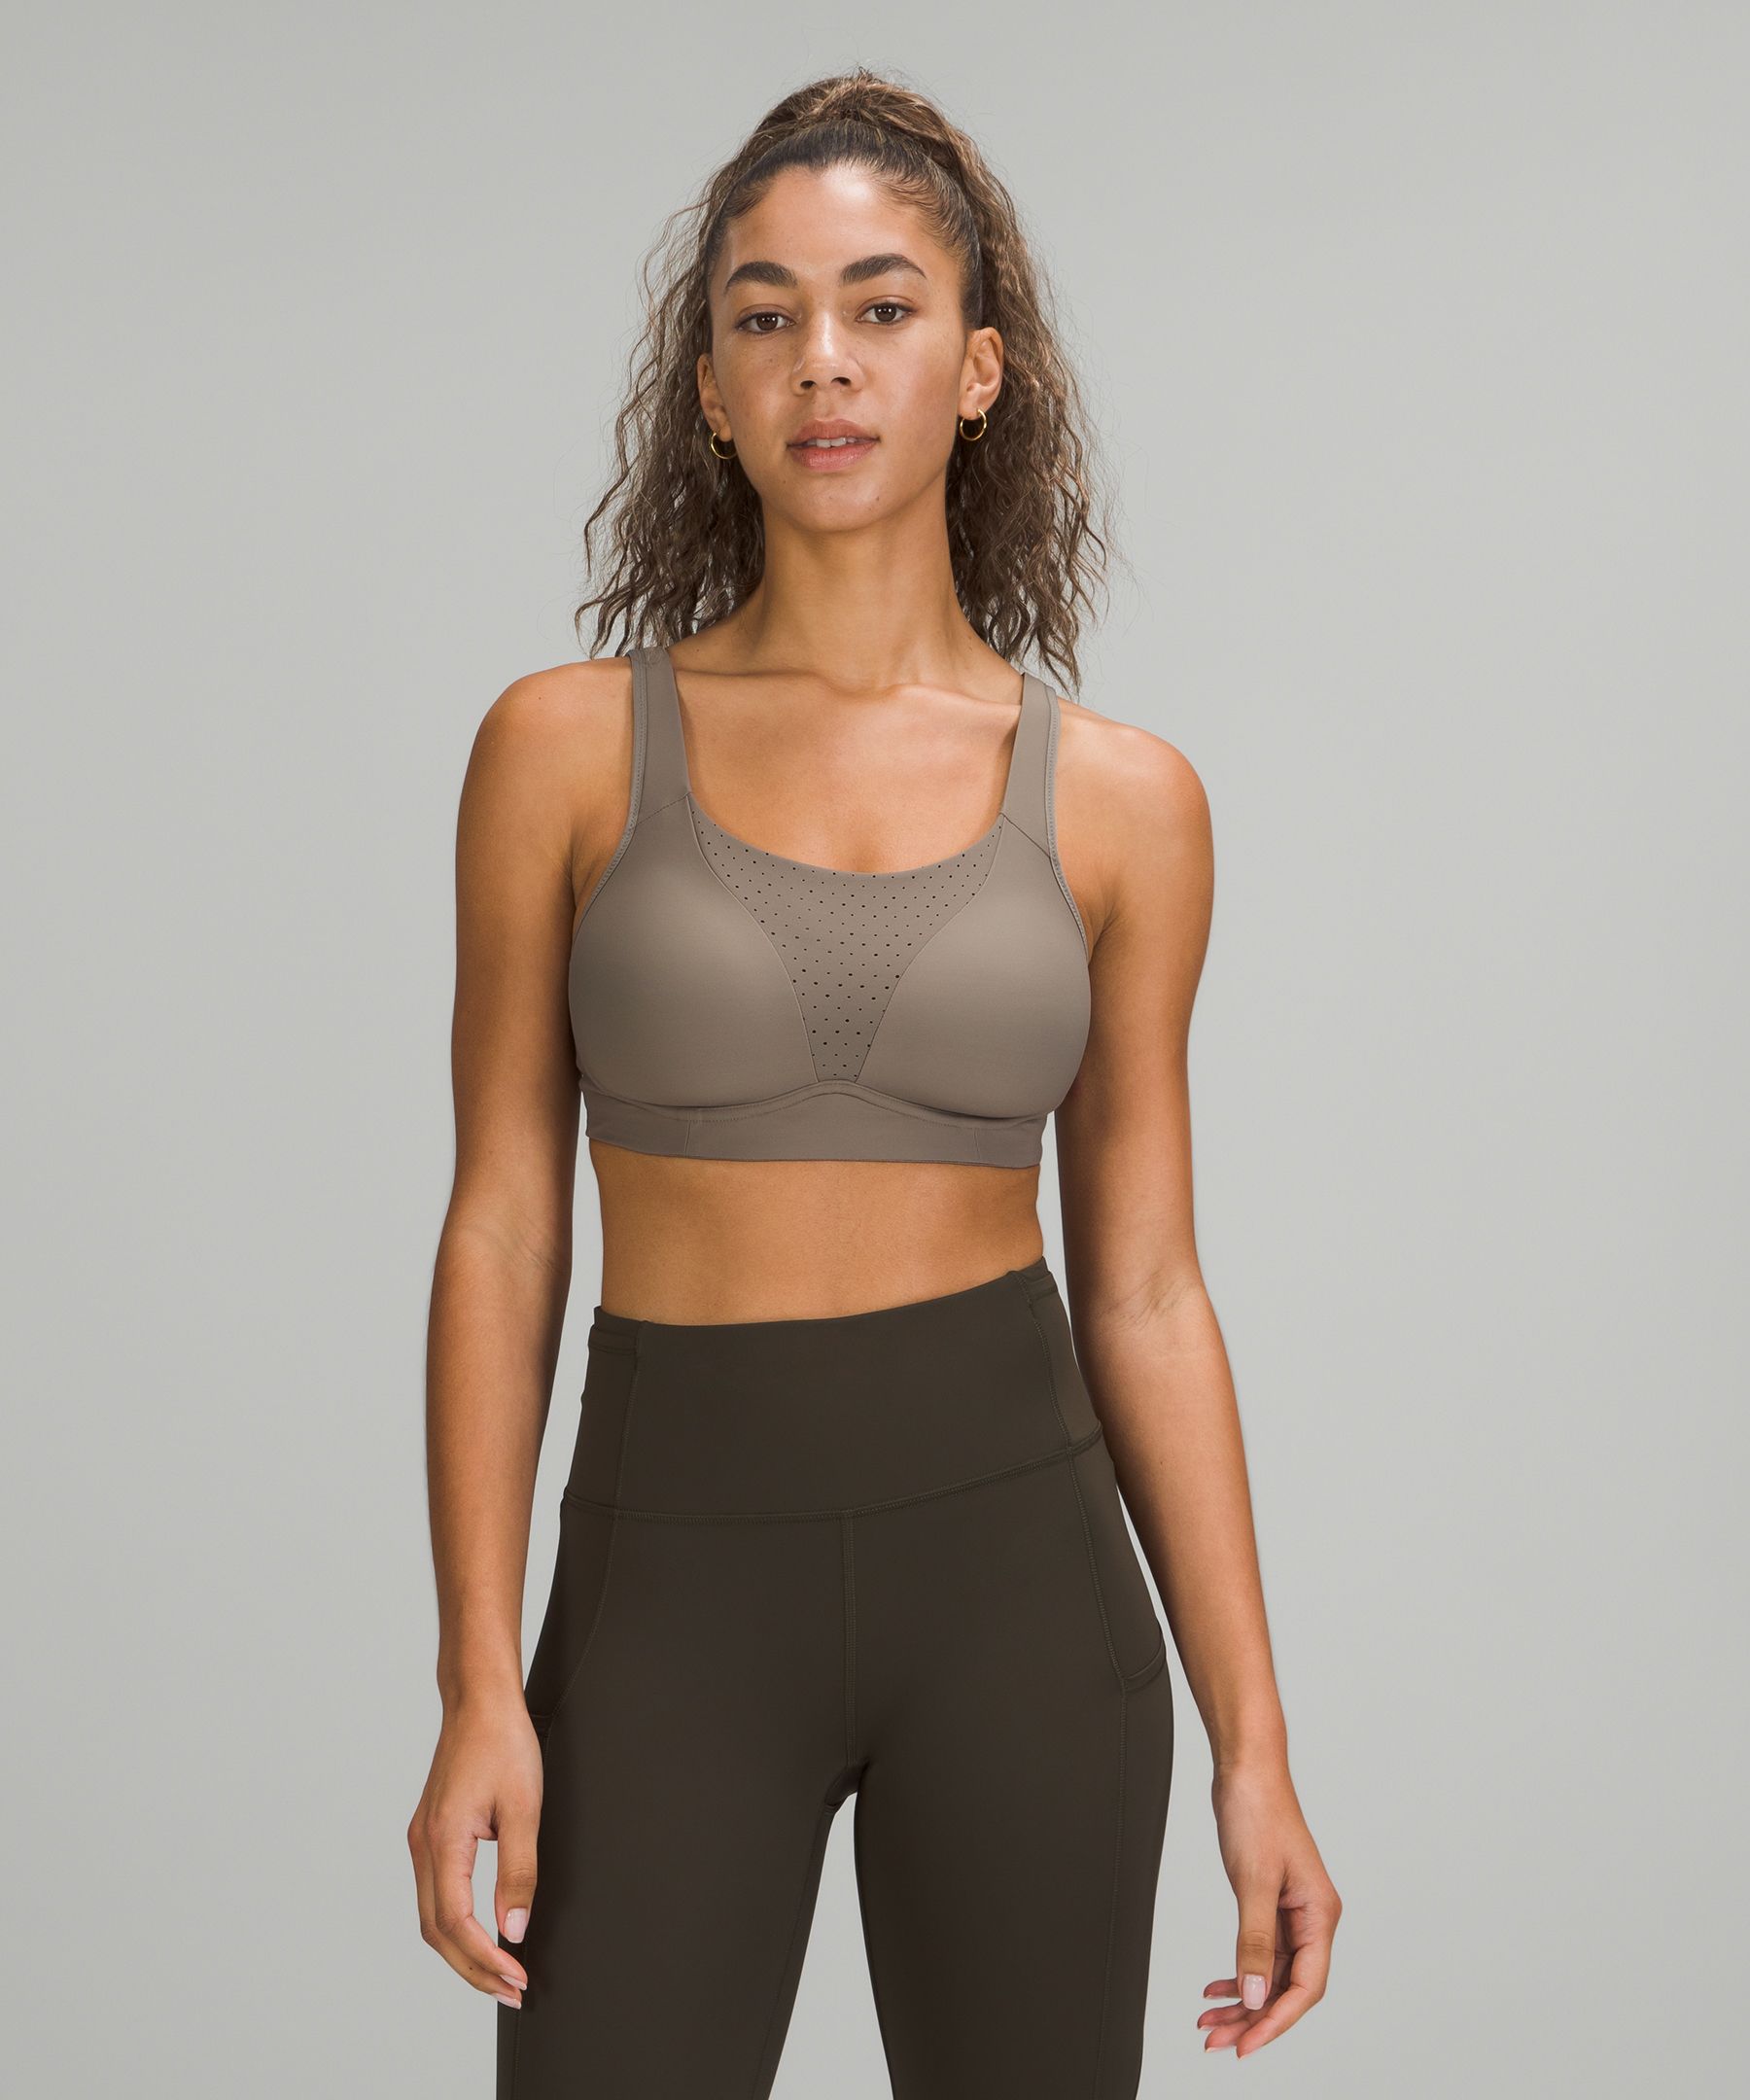 Lululemon Run Times Bra High Support, B-g Cups In Rover